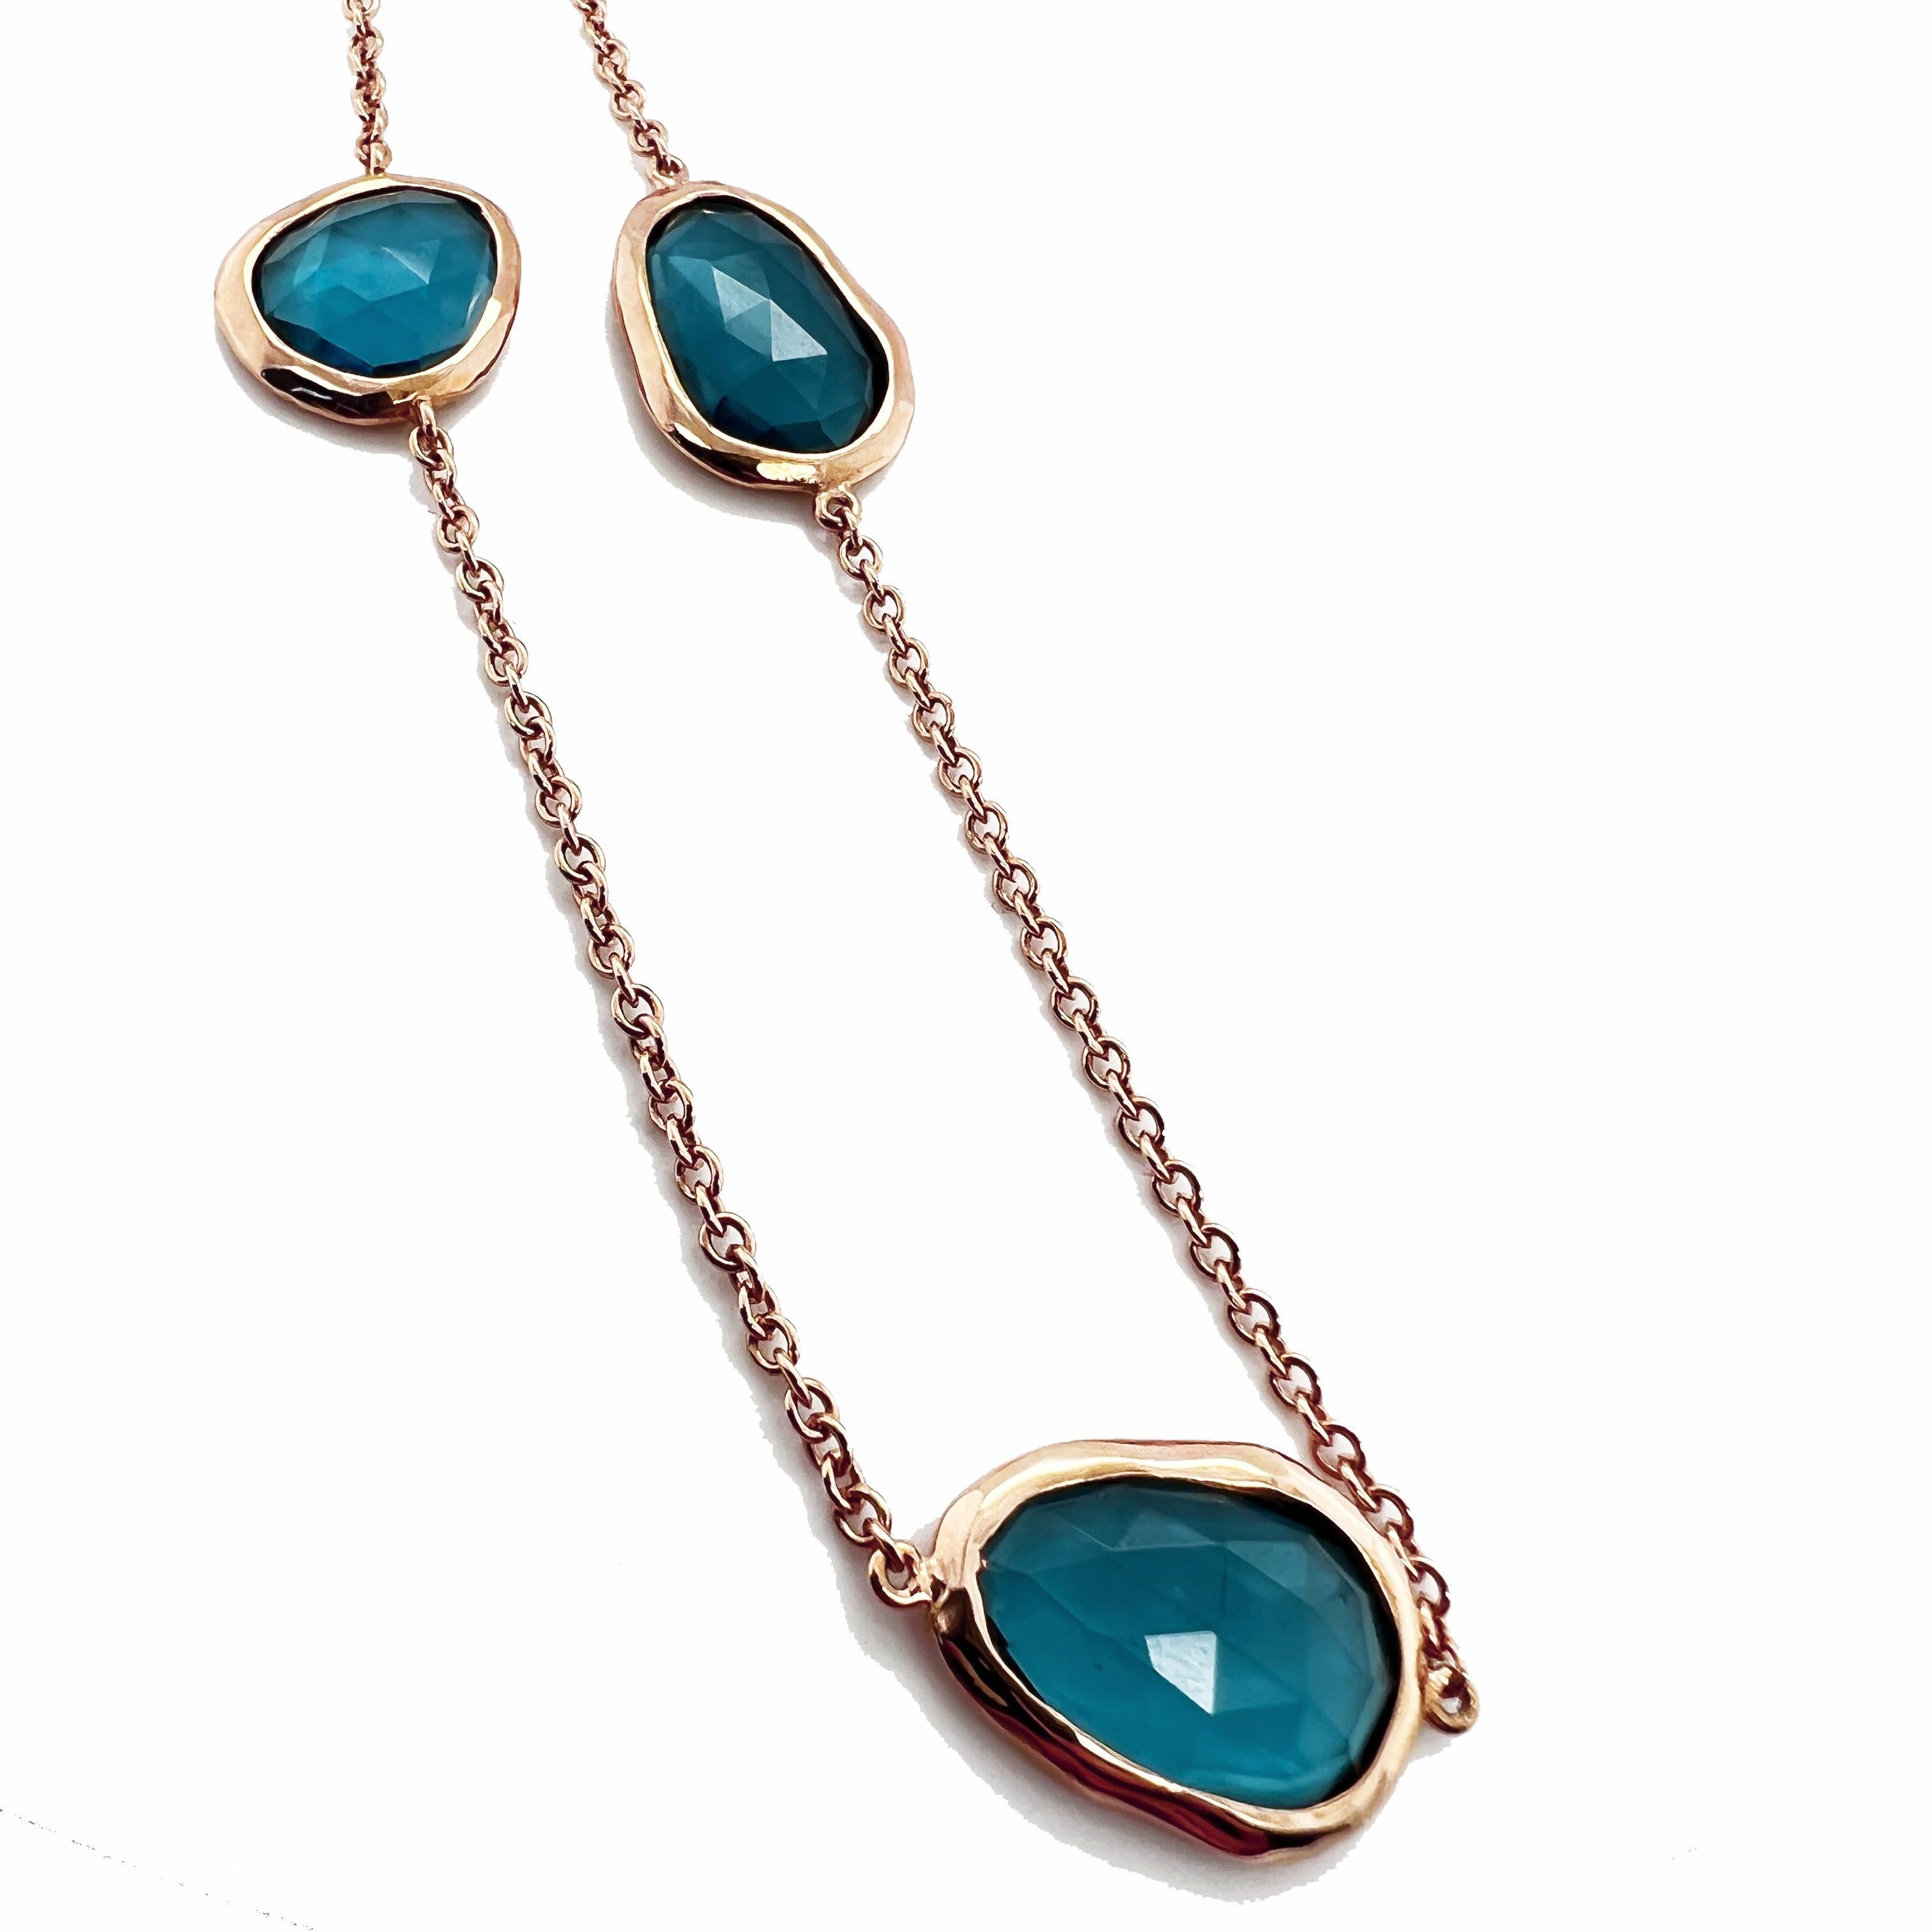 This 18kt Pink Gold Necklace chain with Blue Topaz is a beautiful and elegant piece of jewelry. Pink gold  has a warm and romantic hue that complements various skin tones.

Blue topaz is a stunning gemstone that comes in various shades of blue. Its